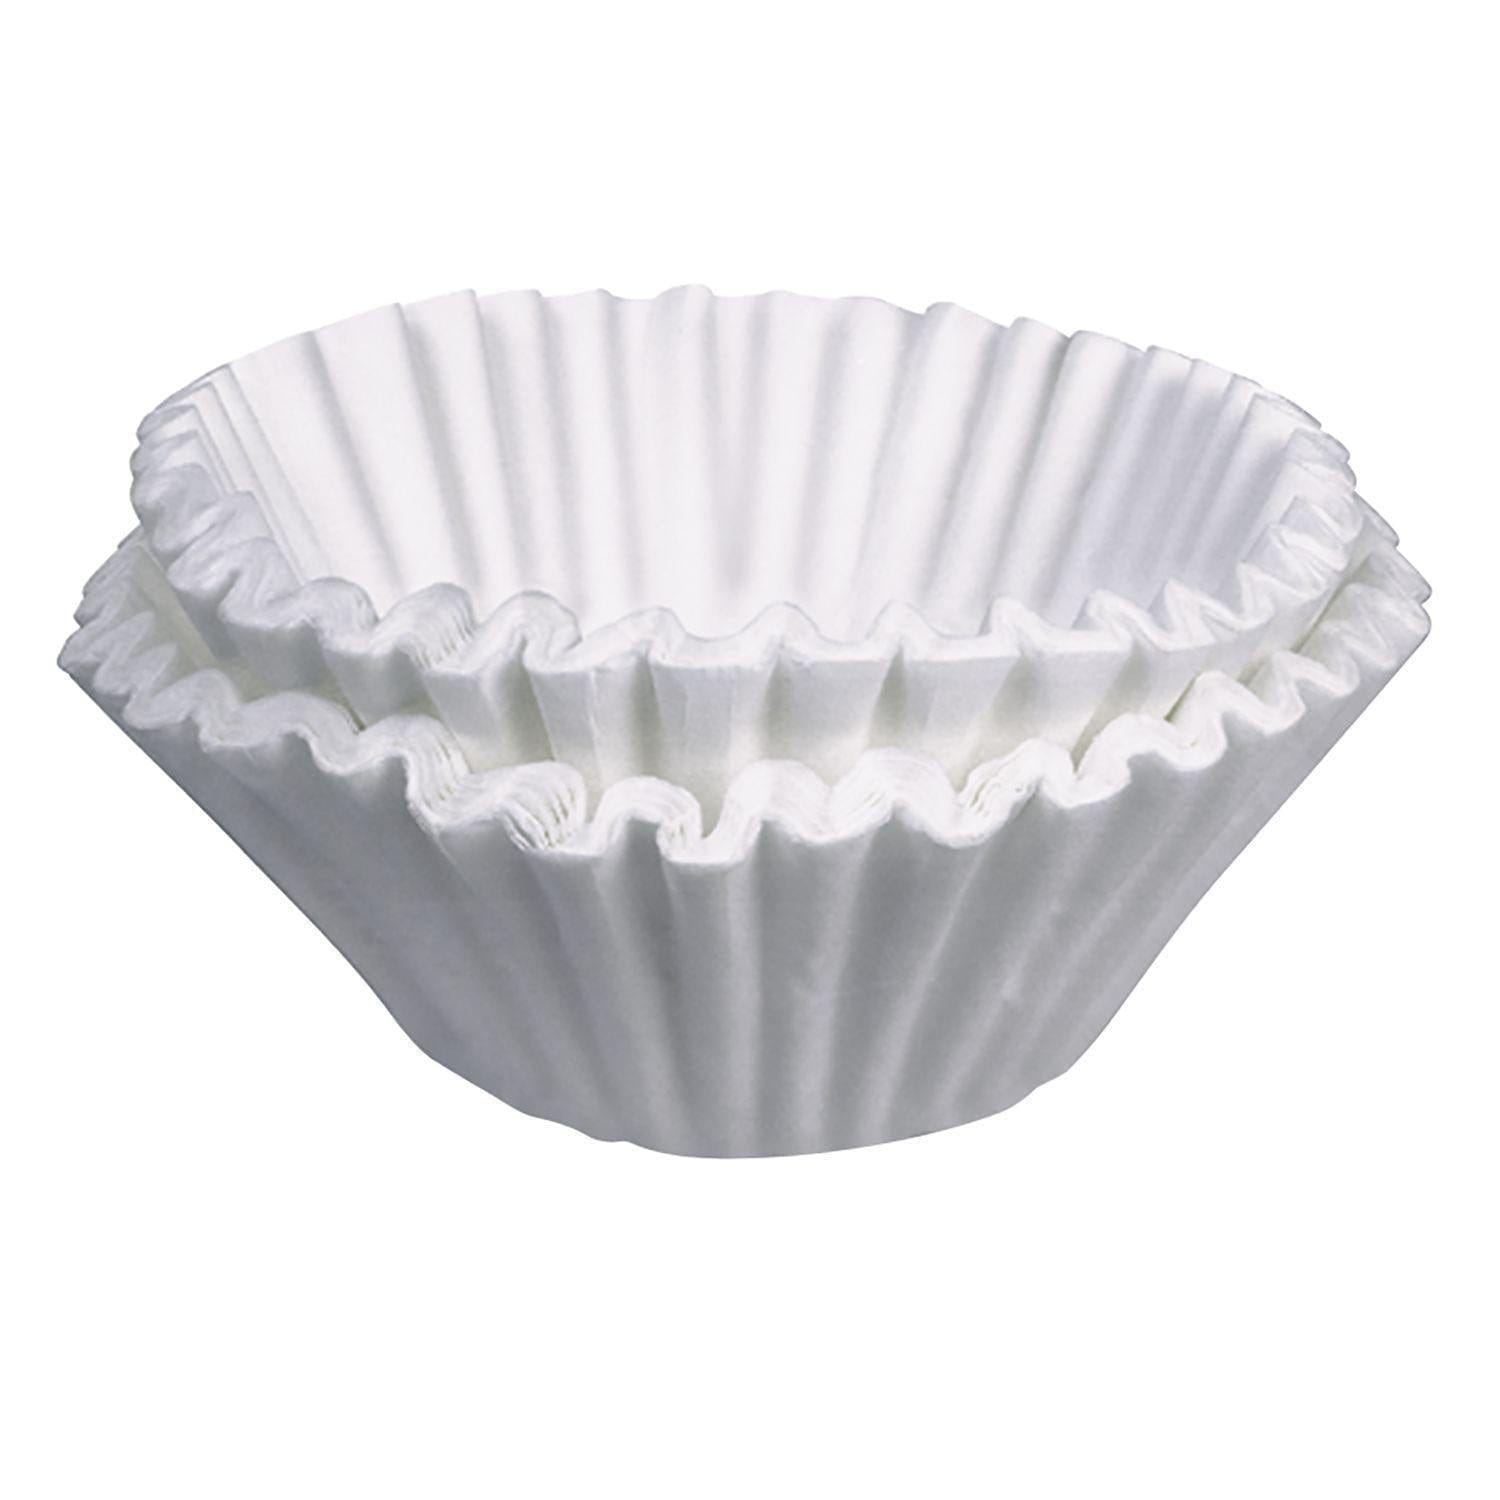 Image of Bunn 23.75 x 8.75 in. Paper Coffee Filters 20113.0000 - Voltage Coffee Supply™